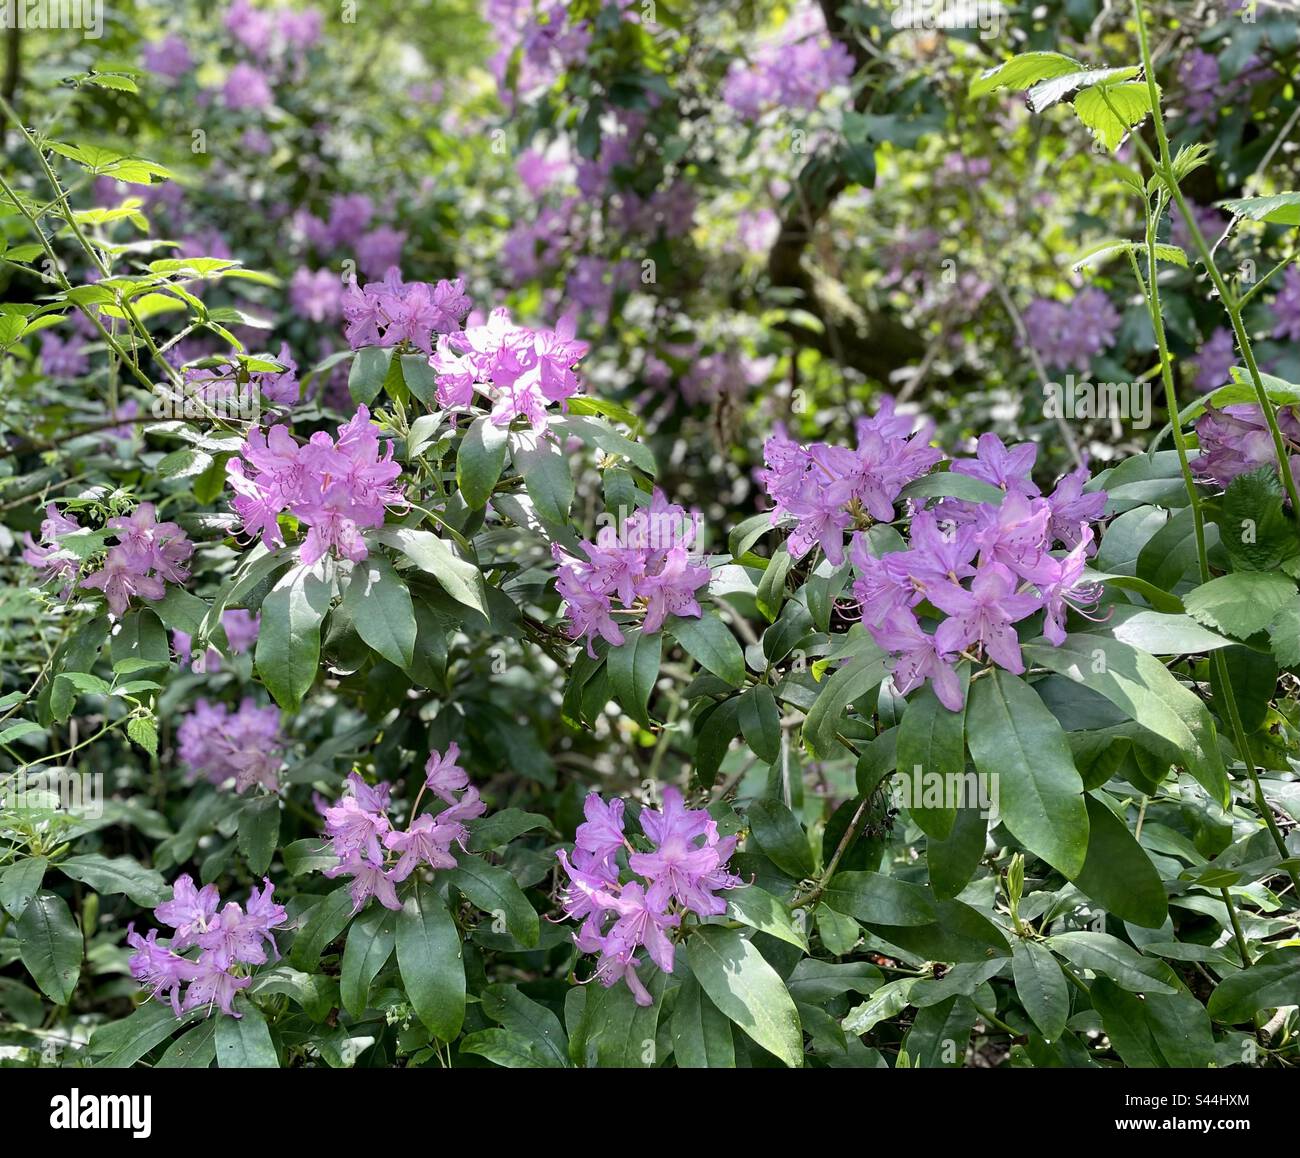 Rhododendron bush growing in the forest. Stock Photo